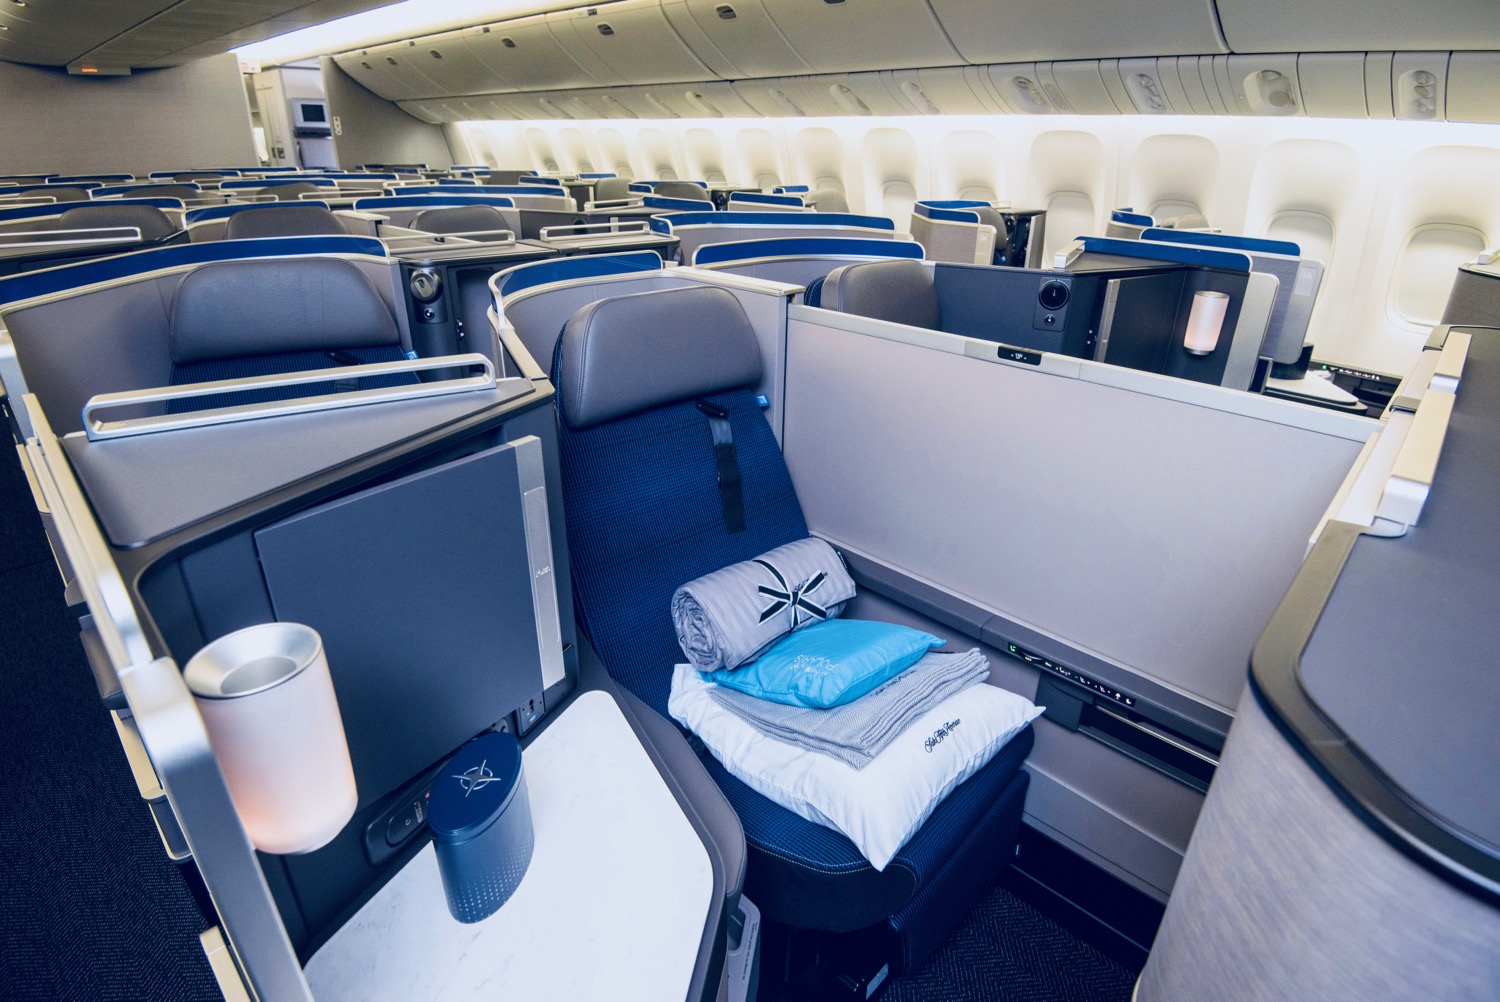 United Boeing 777 200 First Class Seats See This Delta S 777 200